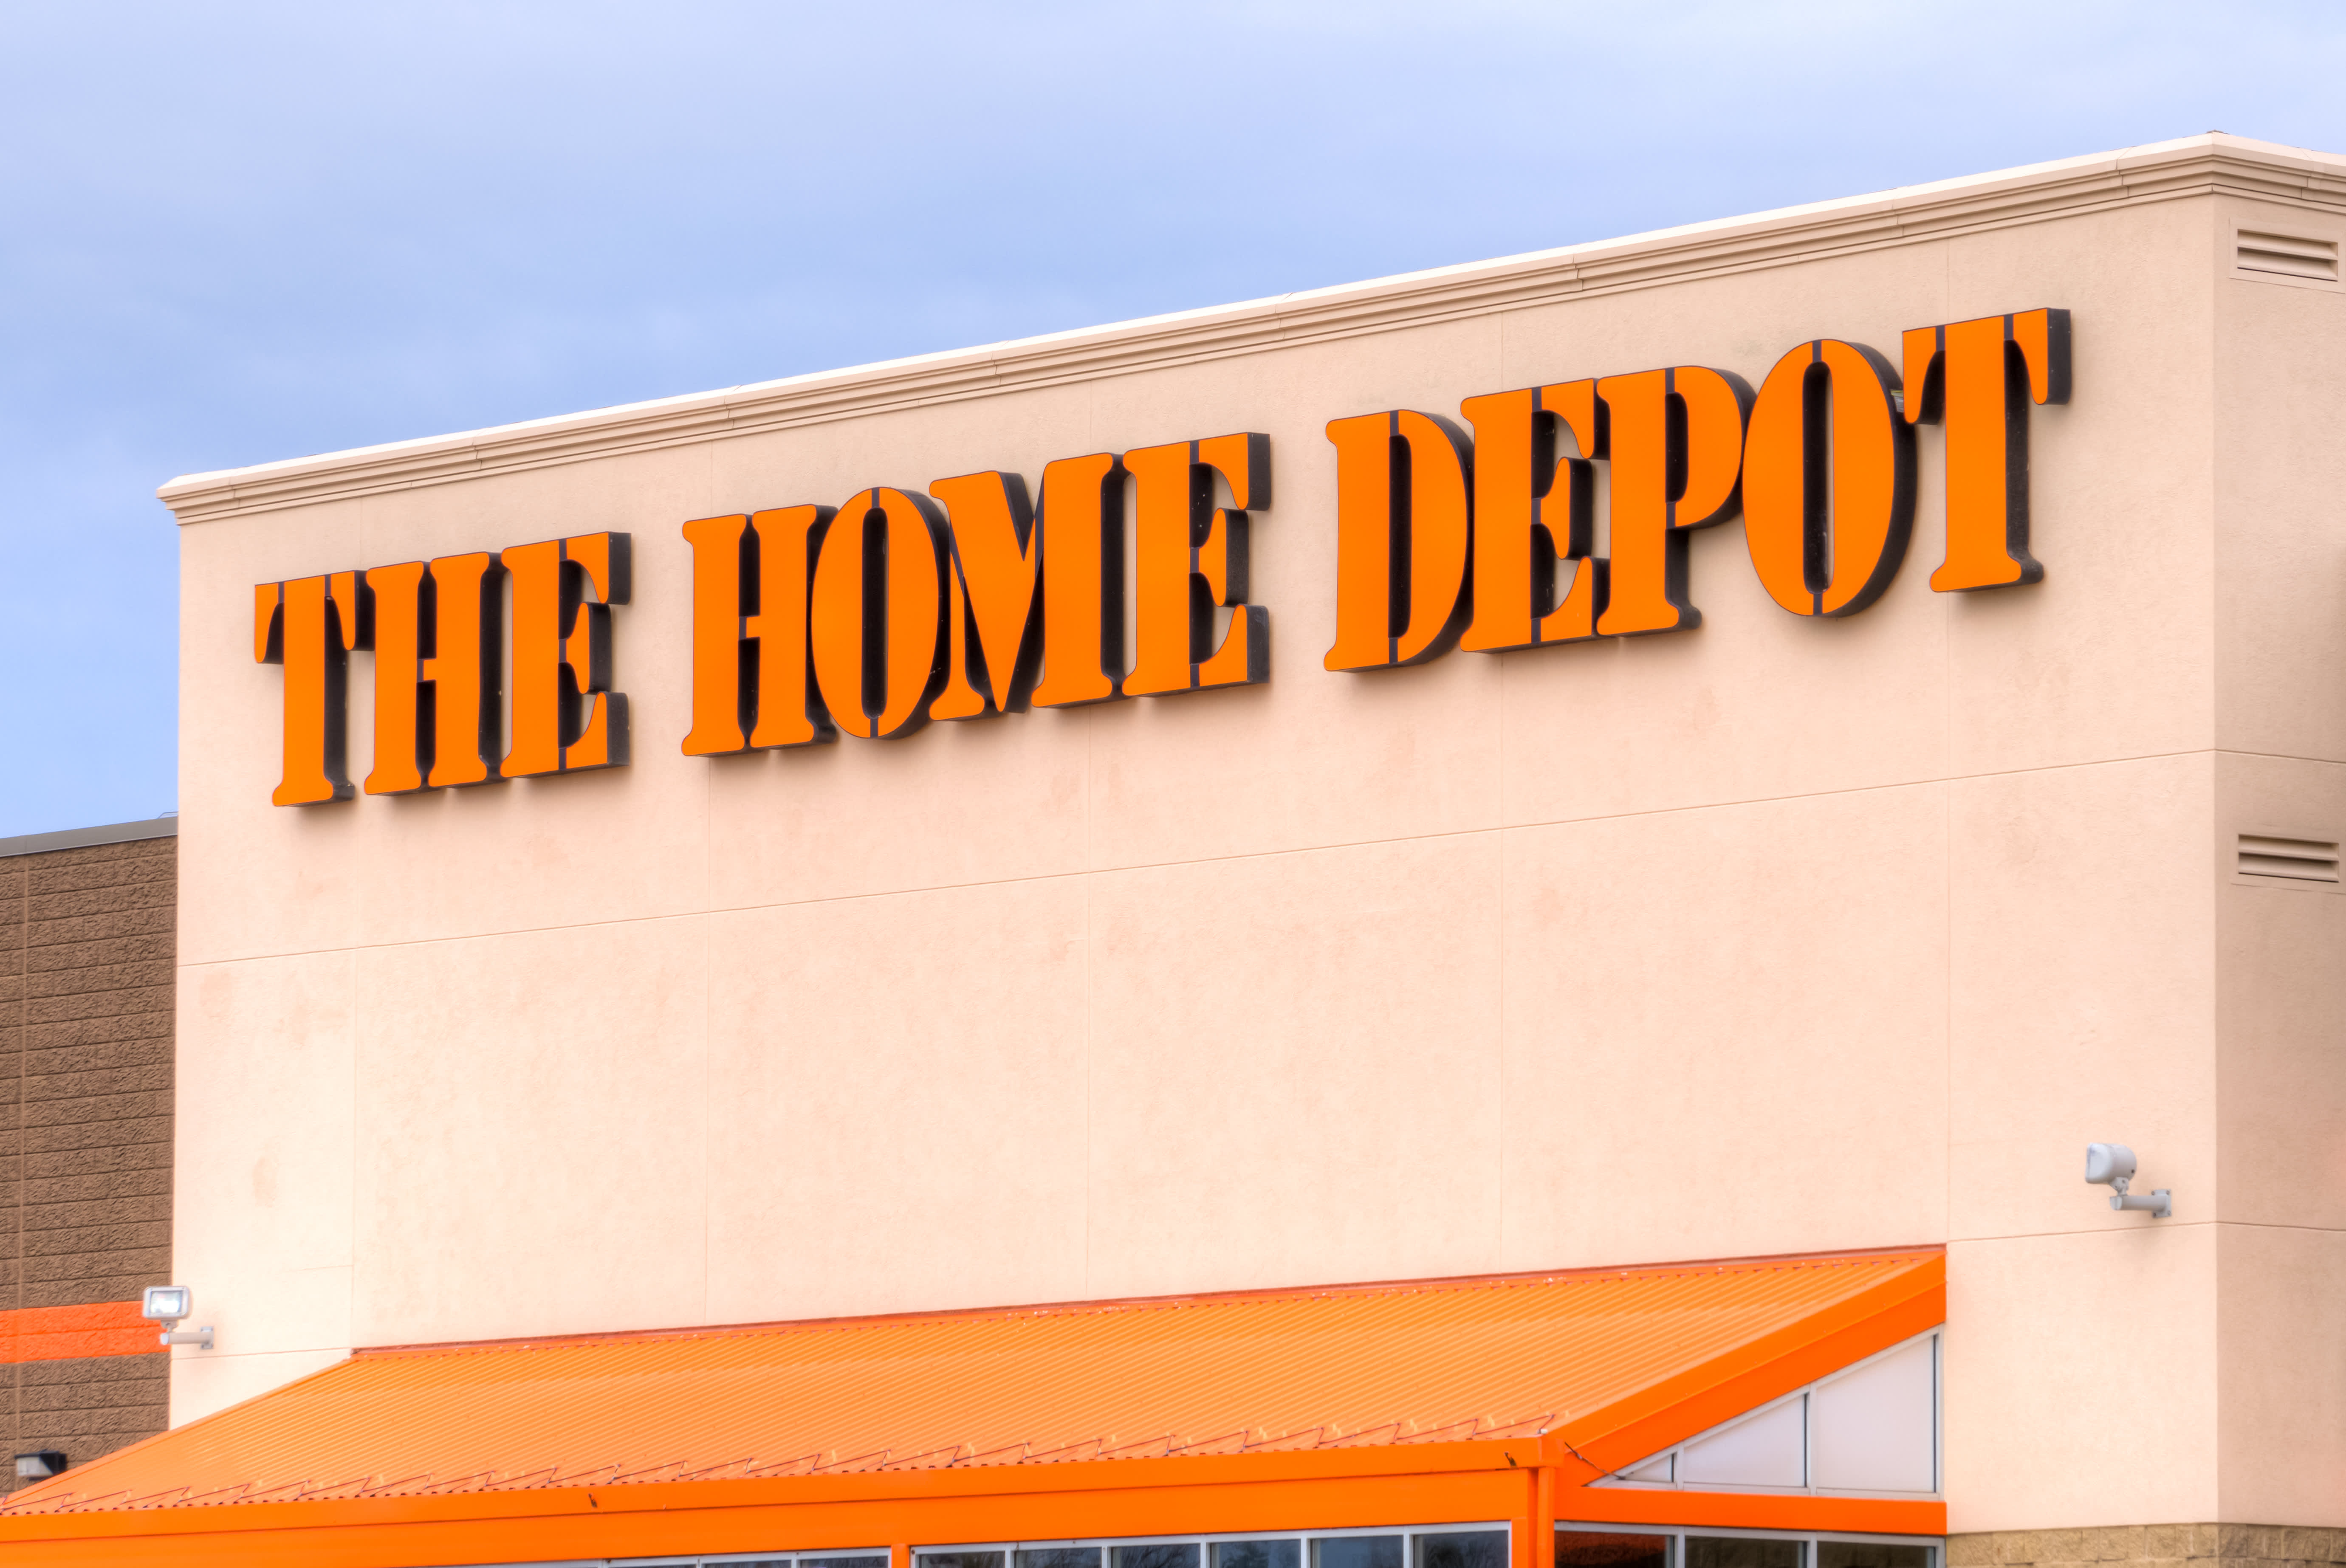 Is Home Depot Open on Memorial Day 2023 - Home Depot's Memorial Day Hours